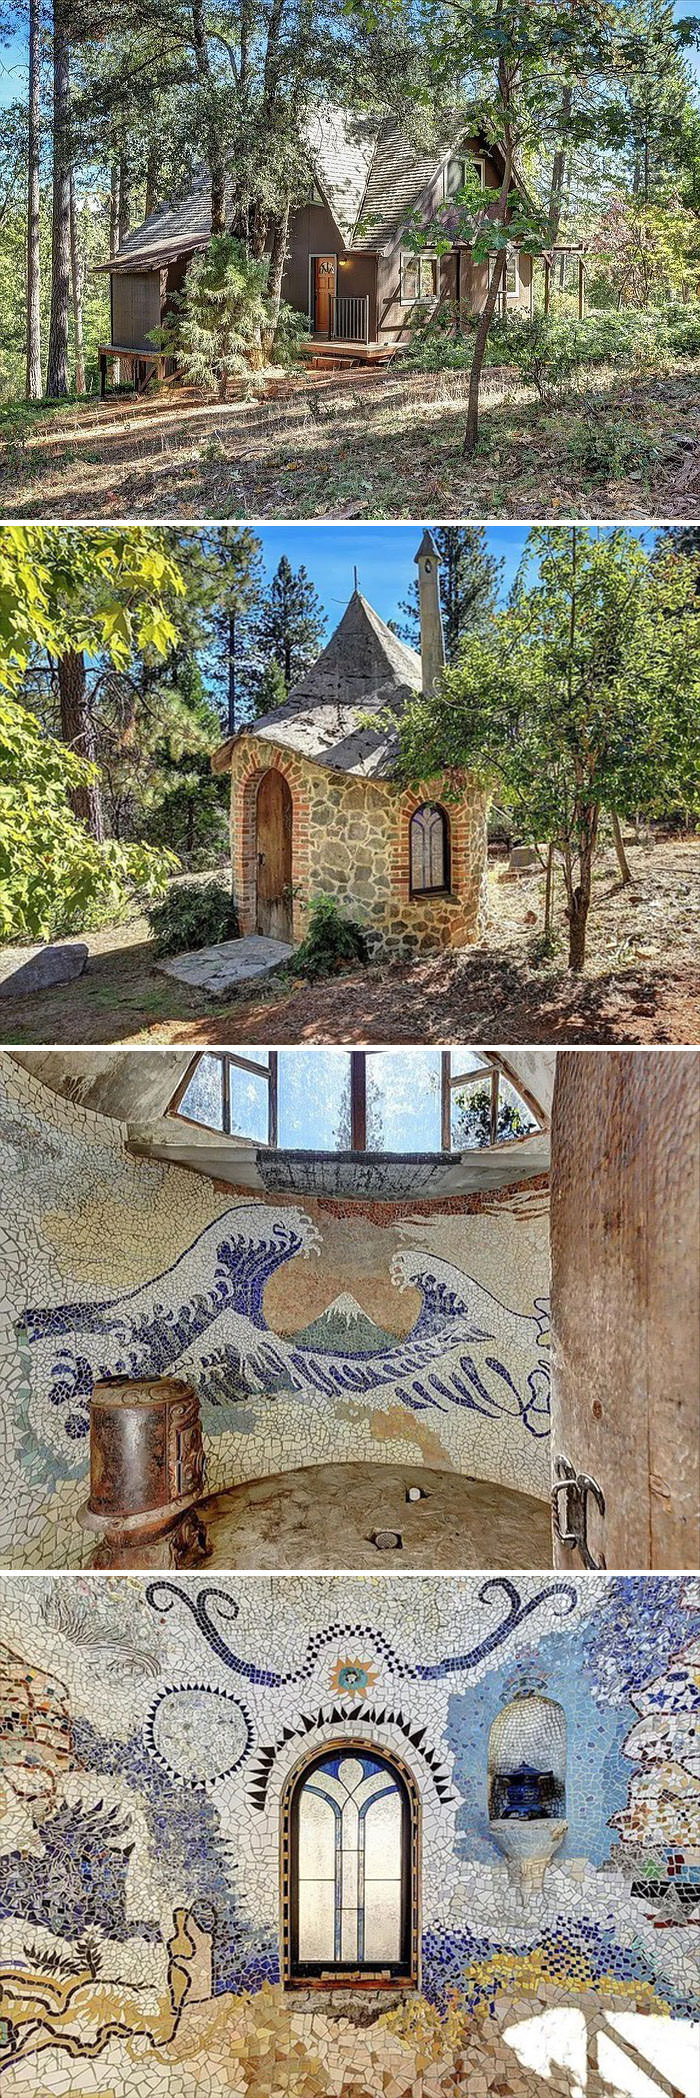 Enjoy this cabin in the woods of California, with a separate bath house, tiled to perfection.